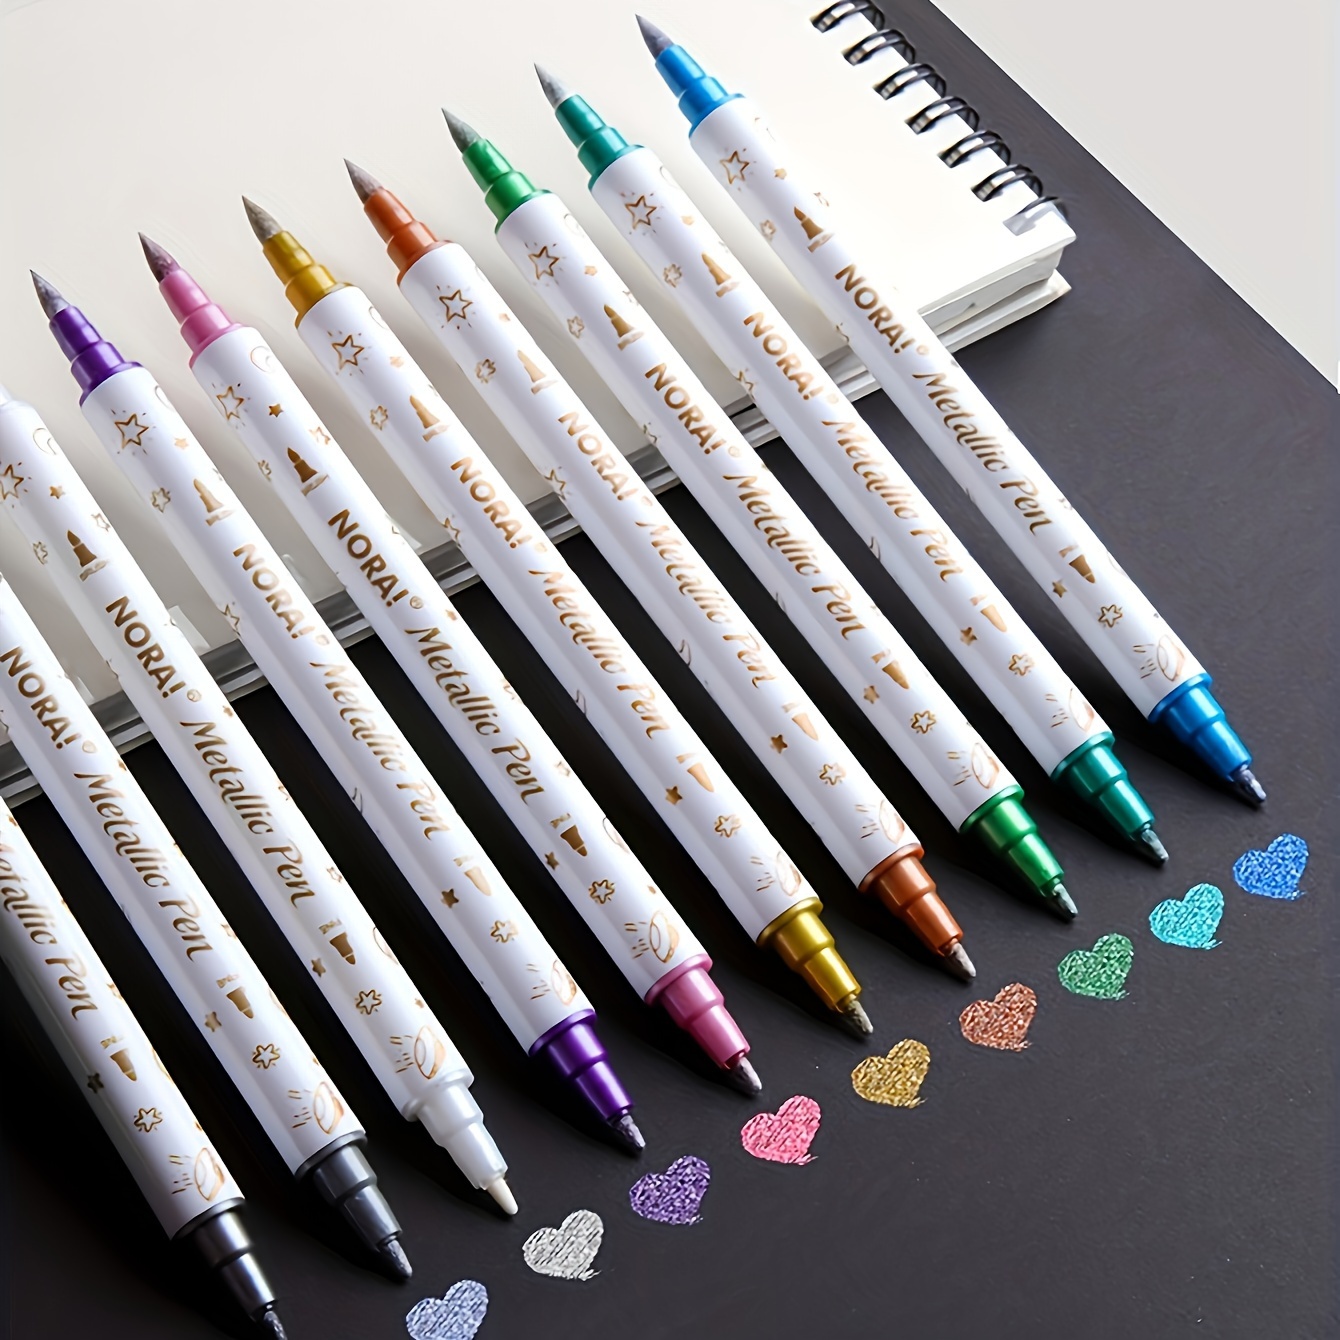 Shimmer Markers Outline Double Line: 12 Colors Metallic Glitter Pens Set  Super Squiggles Sparkle Kid Age 4 8 10 Gift Self Doodle Drawing Supplies  Art